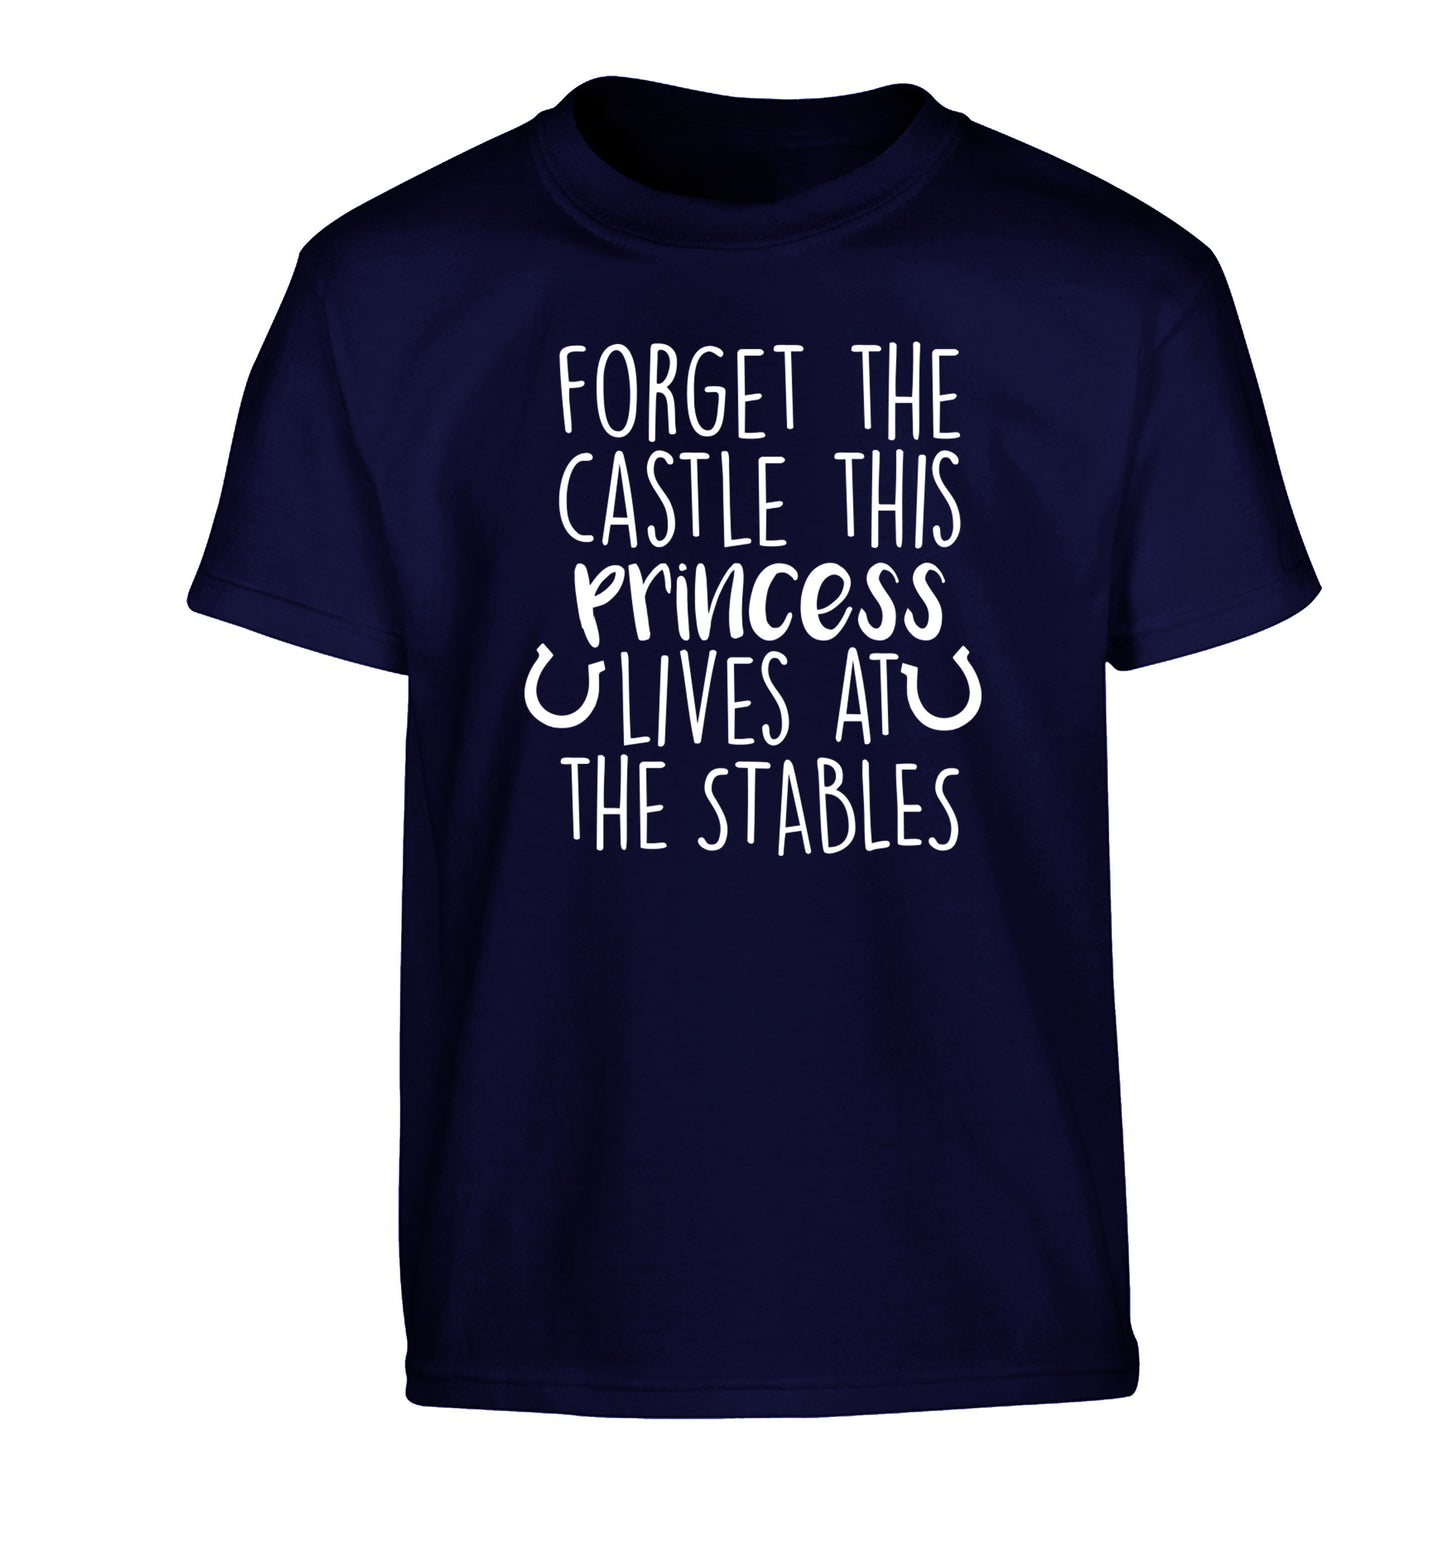 Forget the castle this princess lives at the stables Children's navy Tshirt 12-14 Years